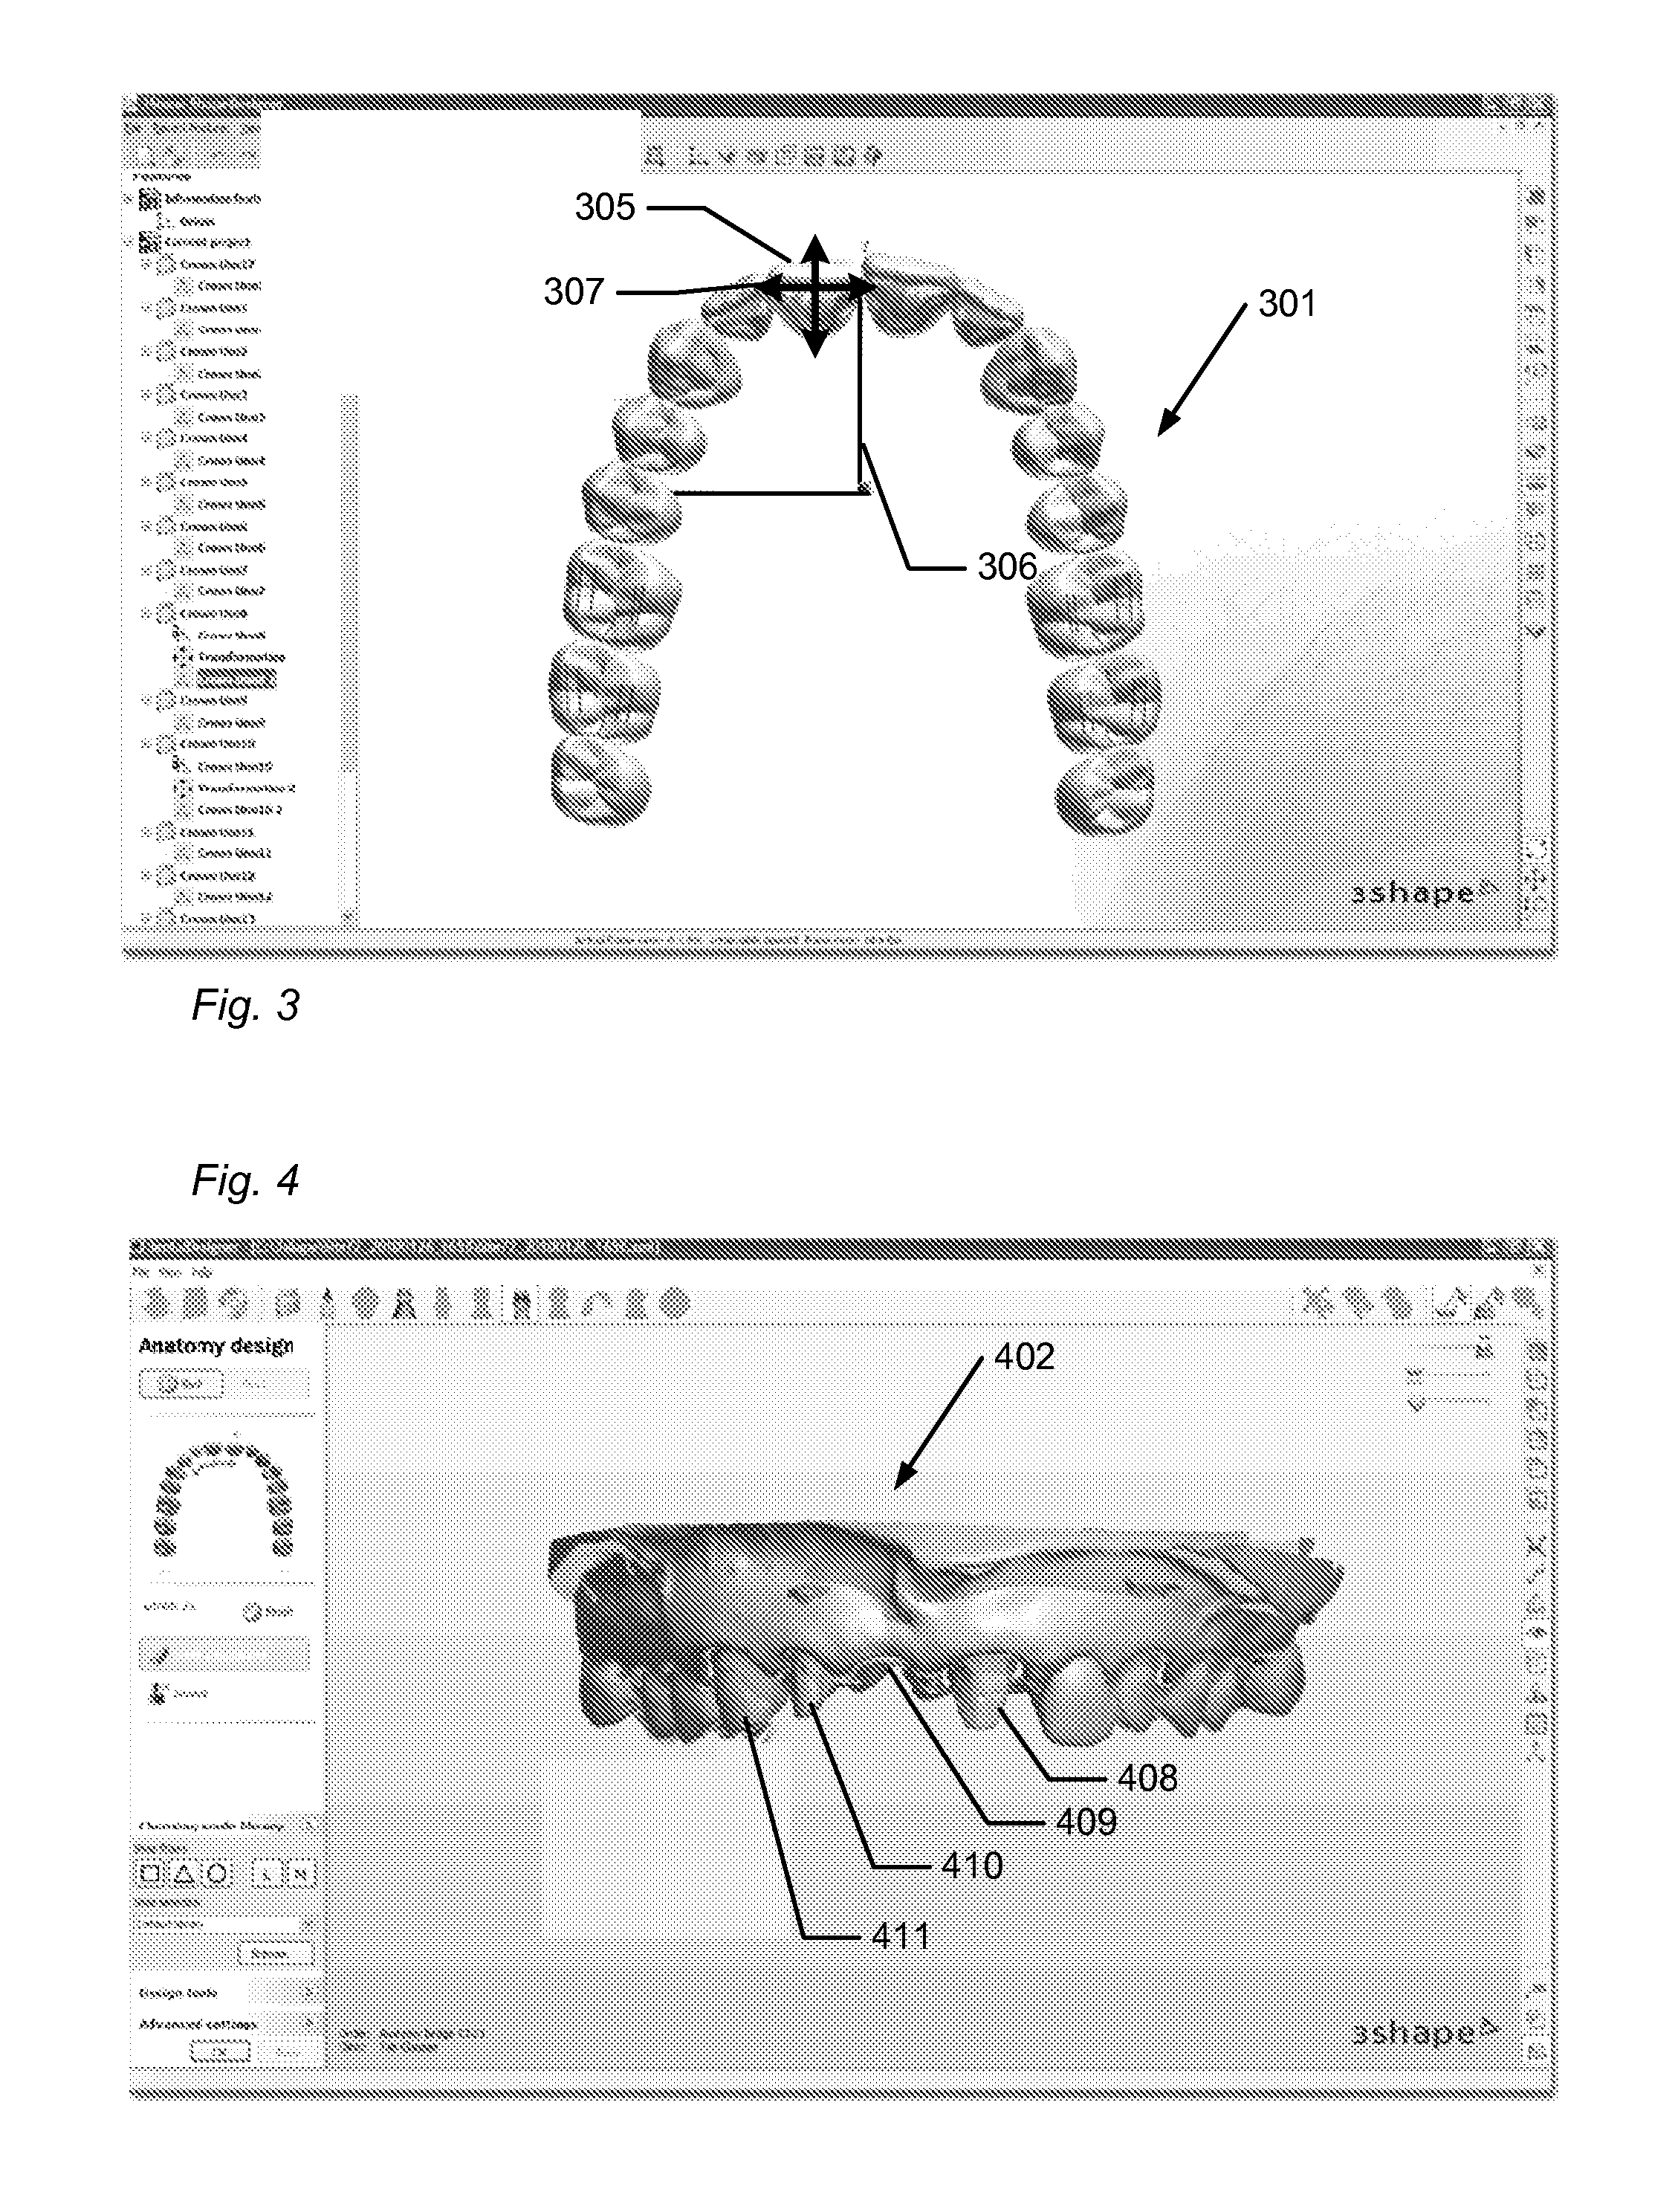 Method of composing and designing a set of teeth